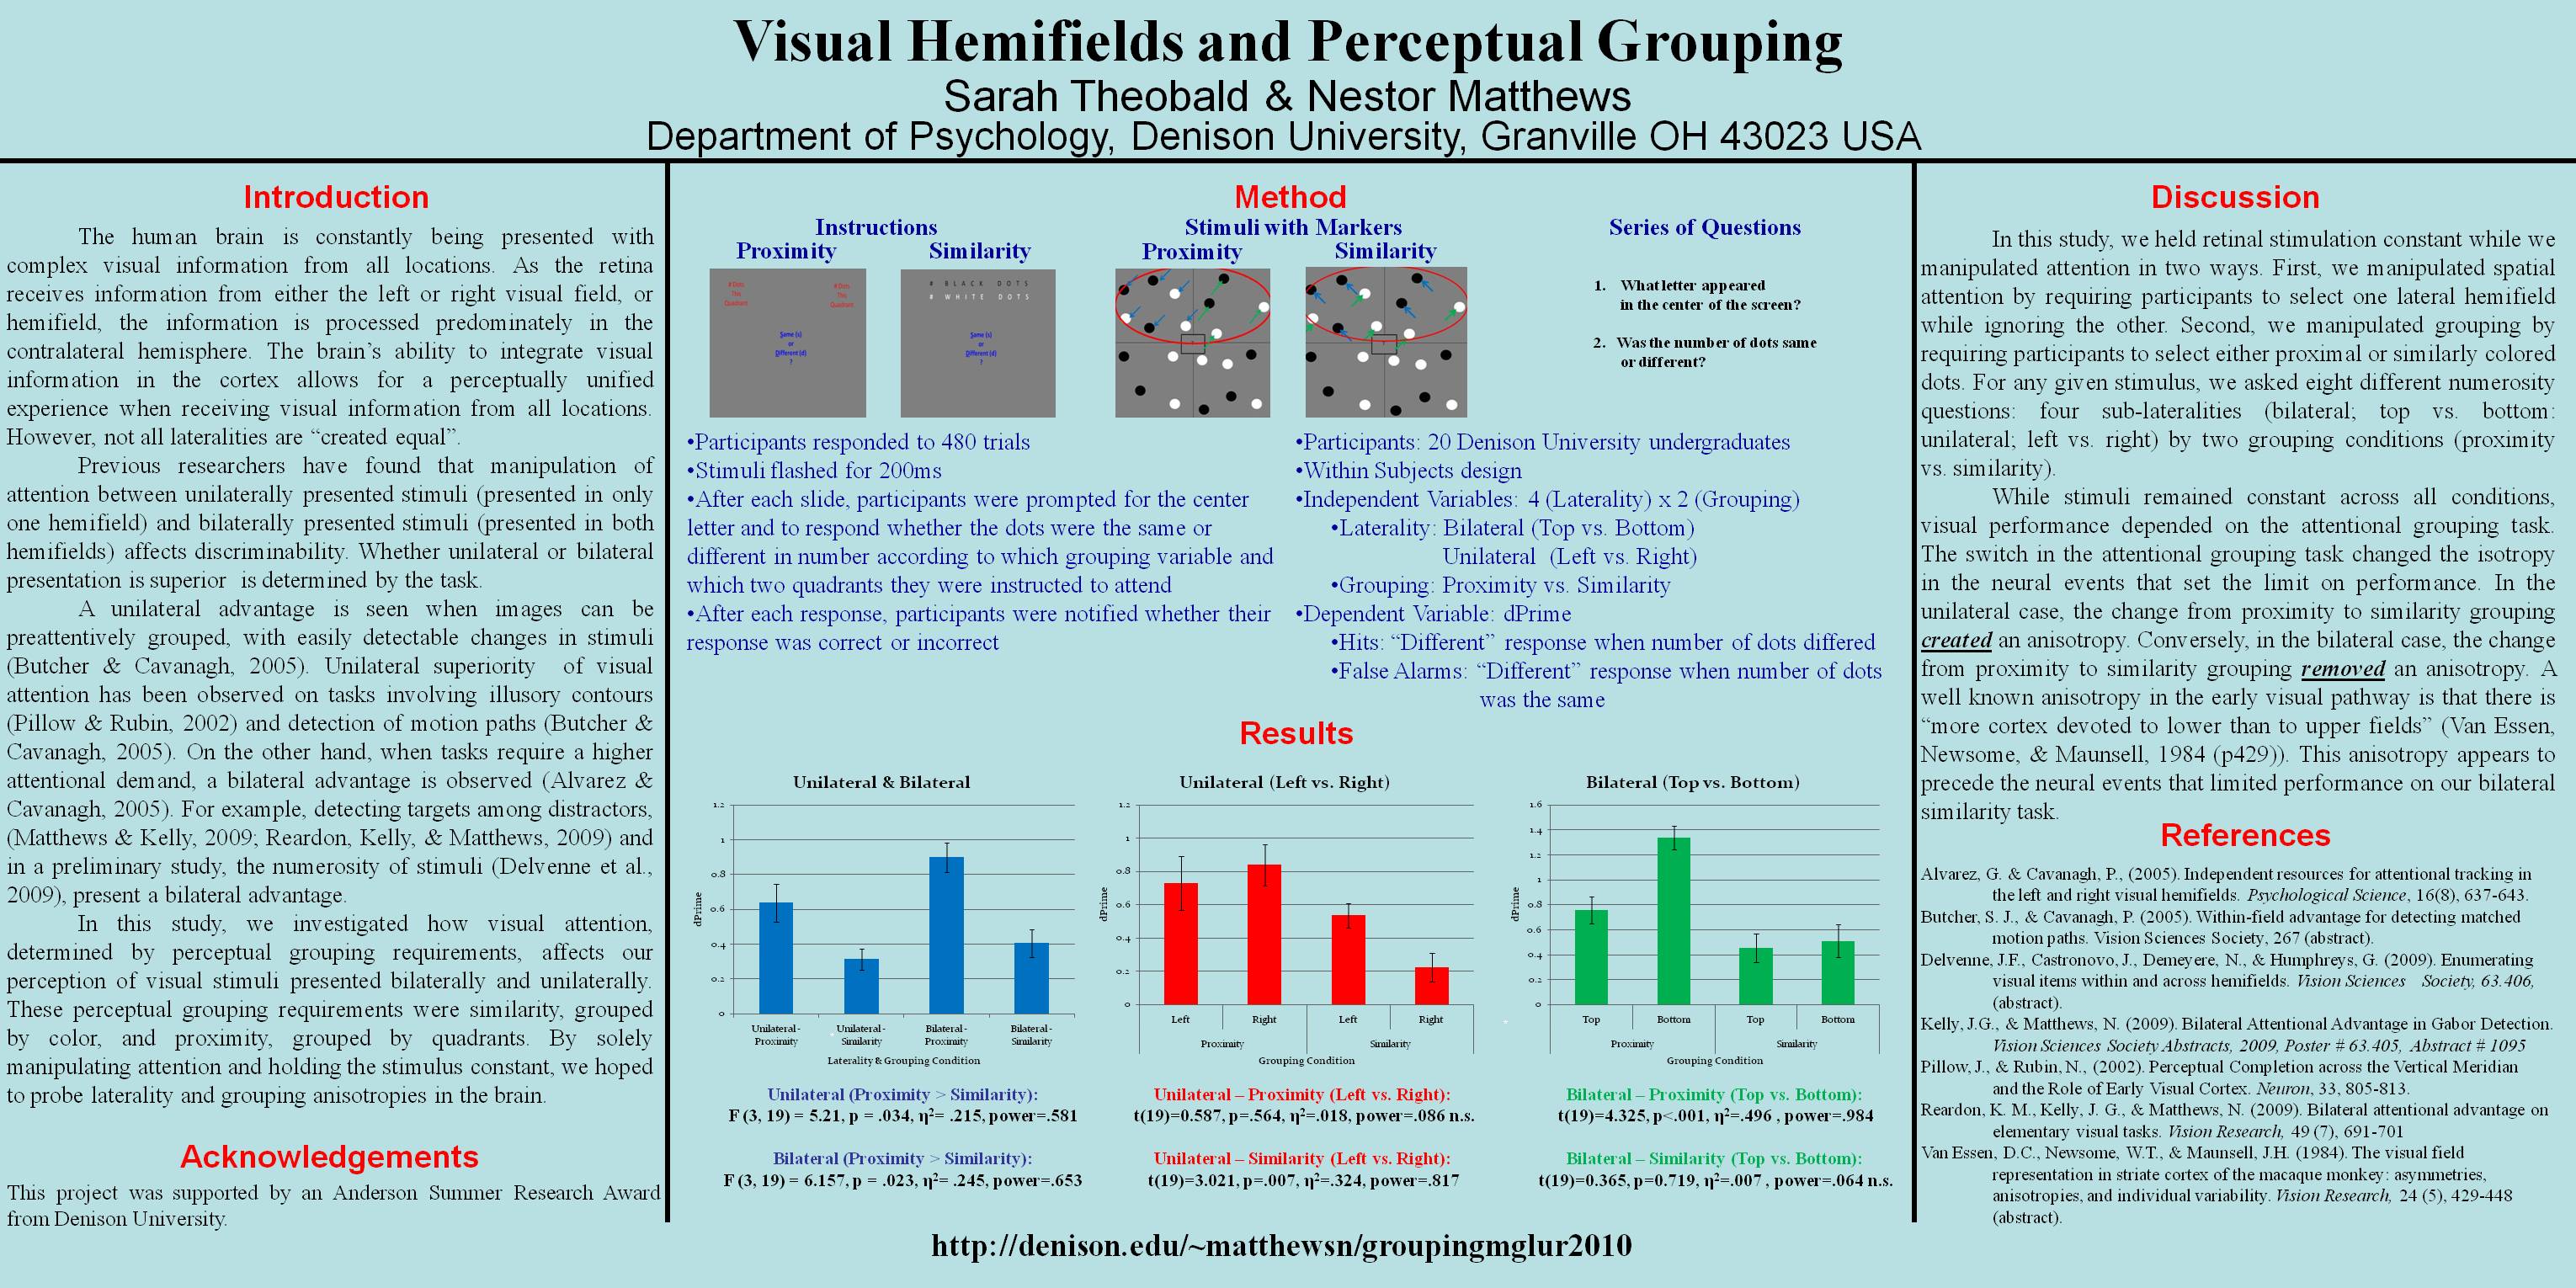 Summer Research Poster 2008